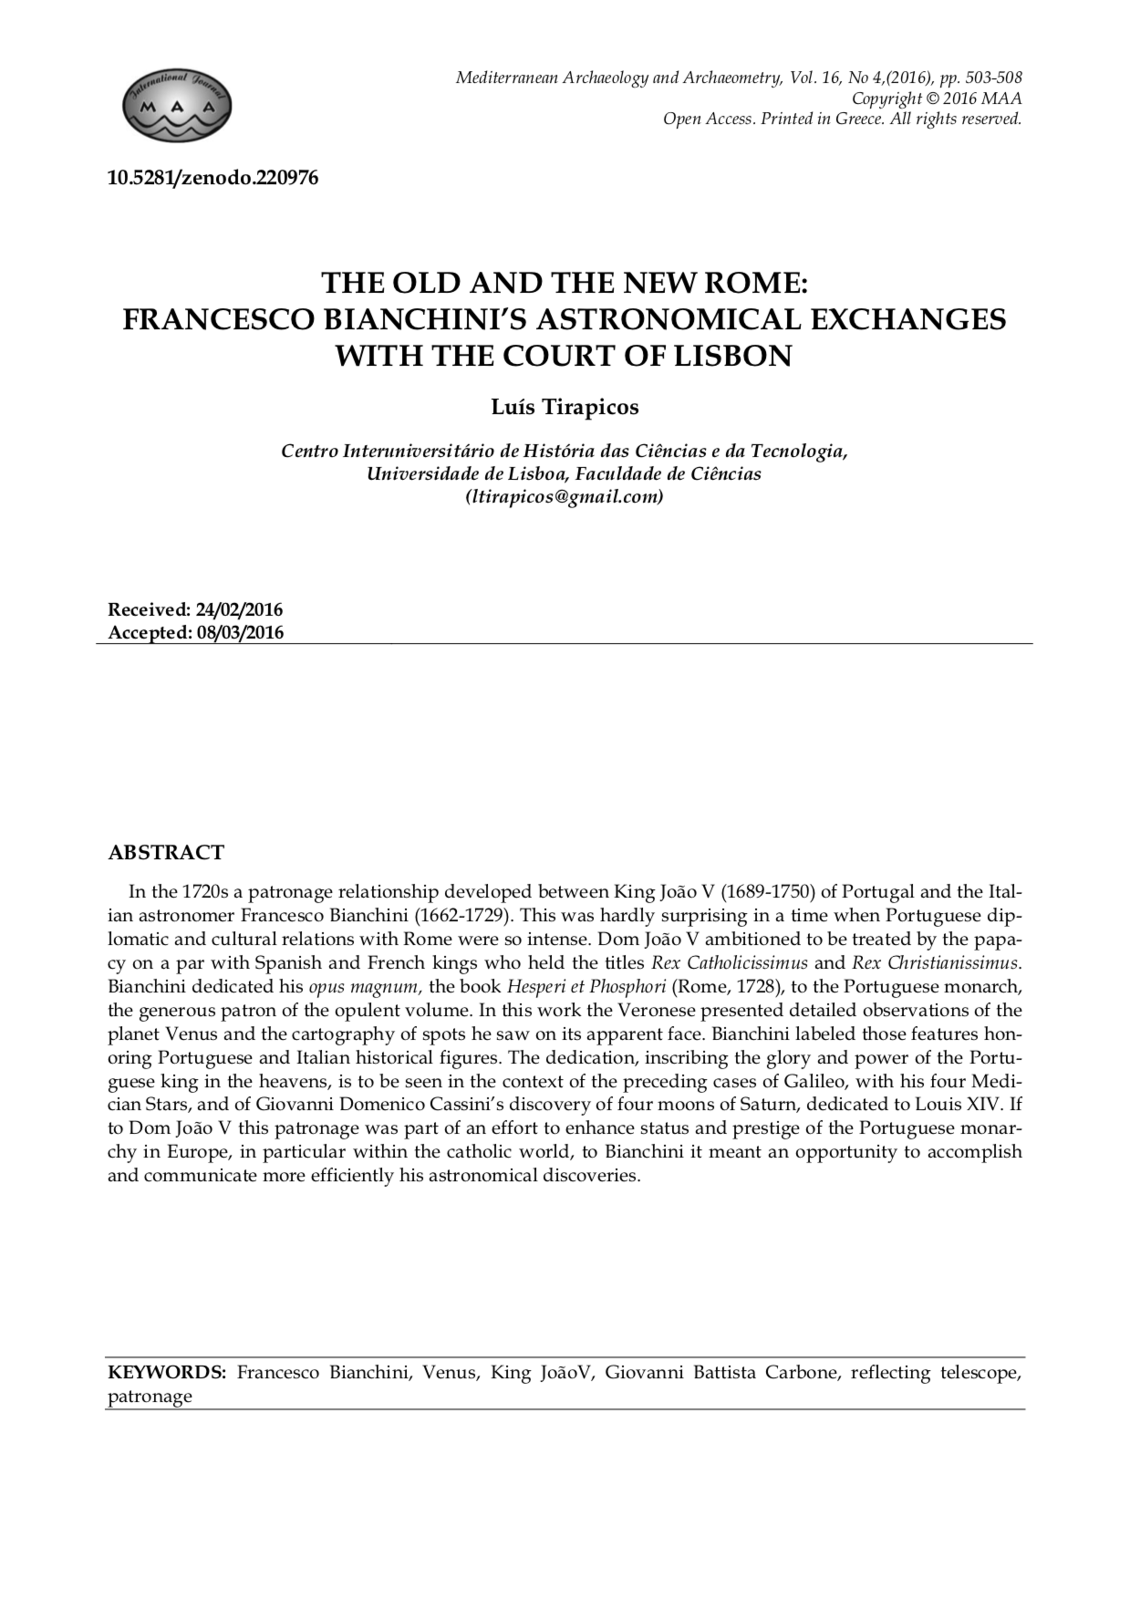 The Old and the New Rome: Francesco Bianchini’s astronomical exchanges with the court of Lisbon, Capa